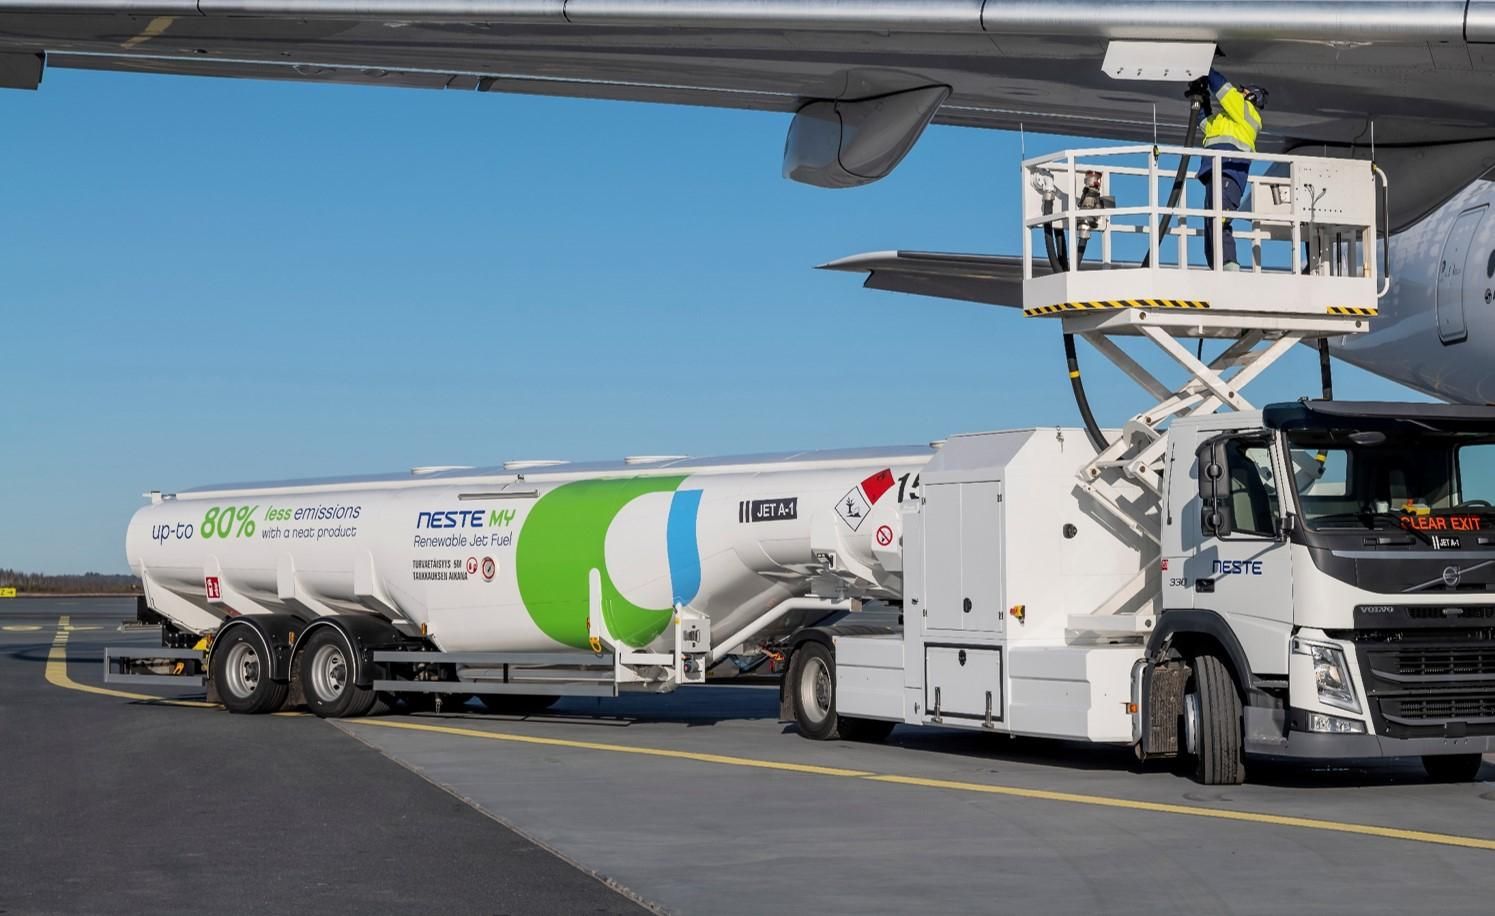 Neste SAF fuel tank refueling aircraft at airport